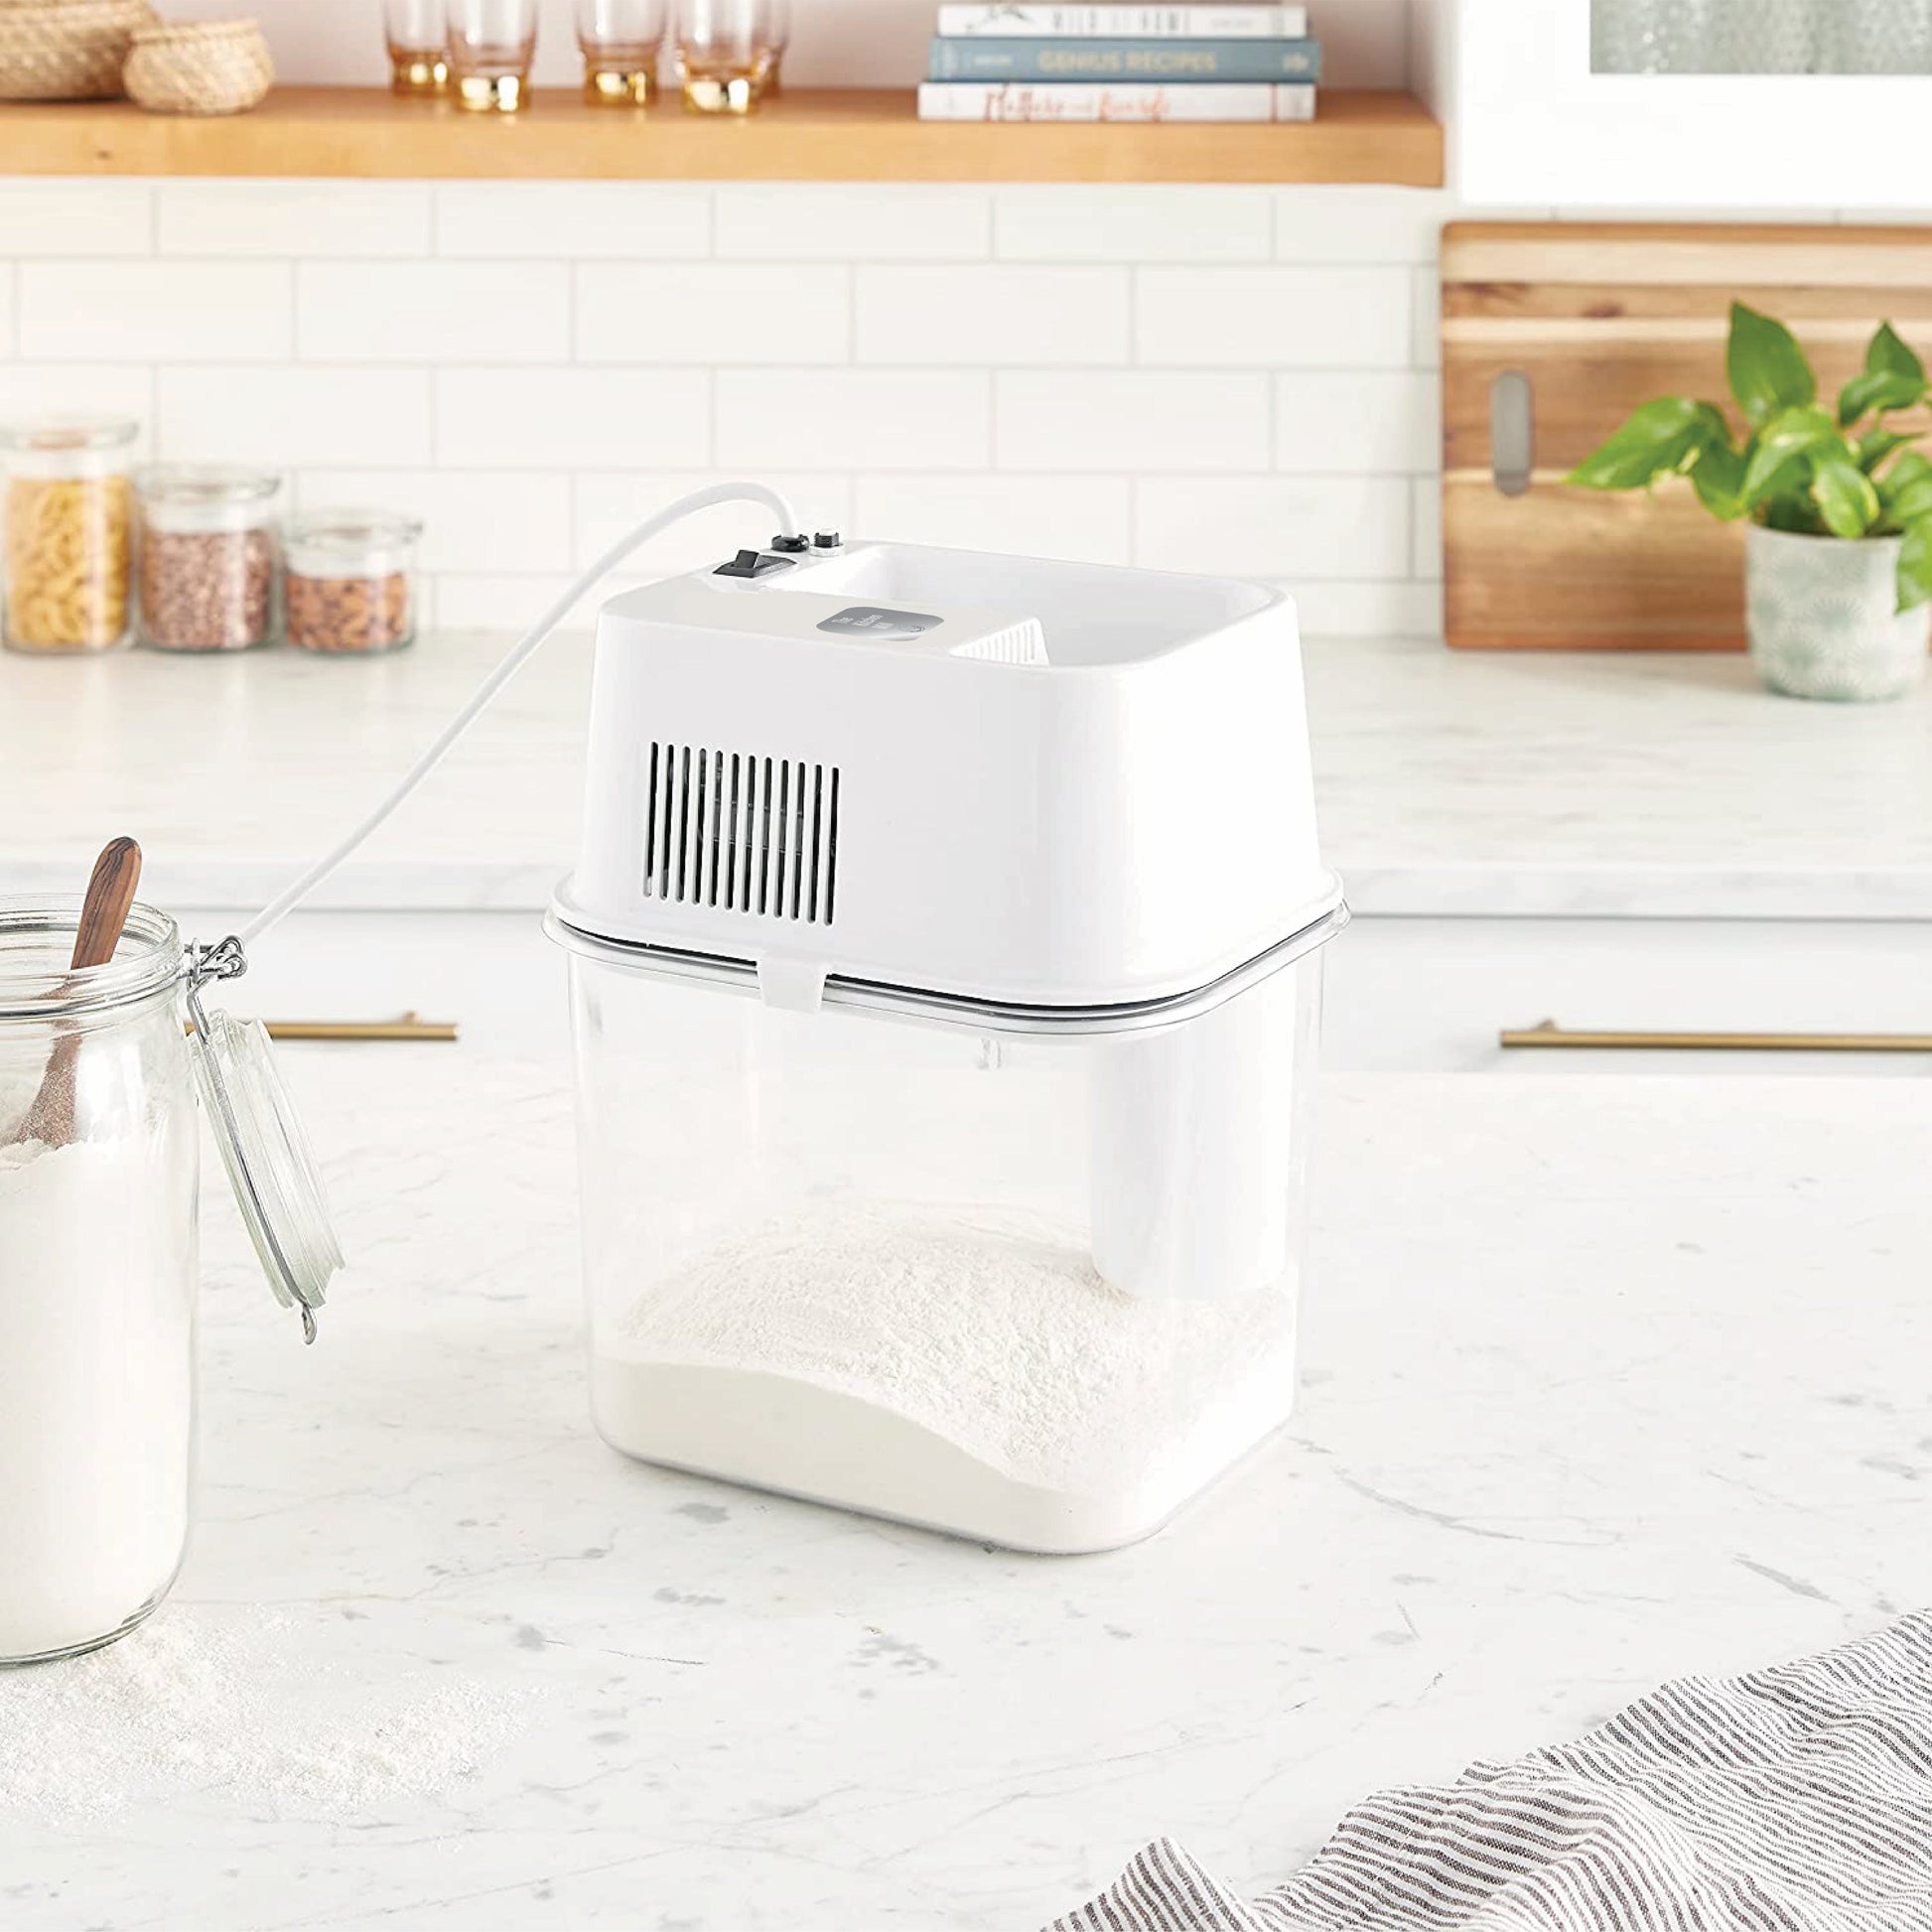 The Kitchen Mill - High Speed Electric Grain/Flour Mill - Assembled in the USA The Kitchen Mill